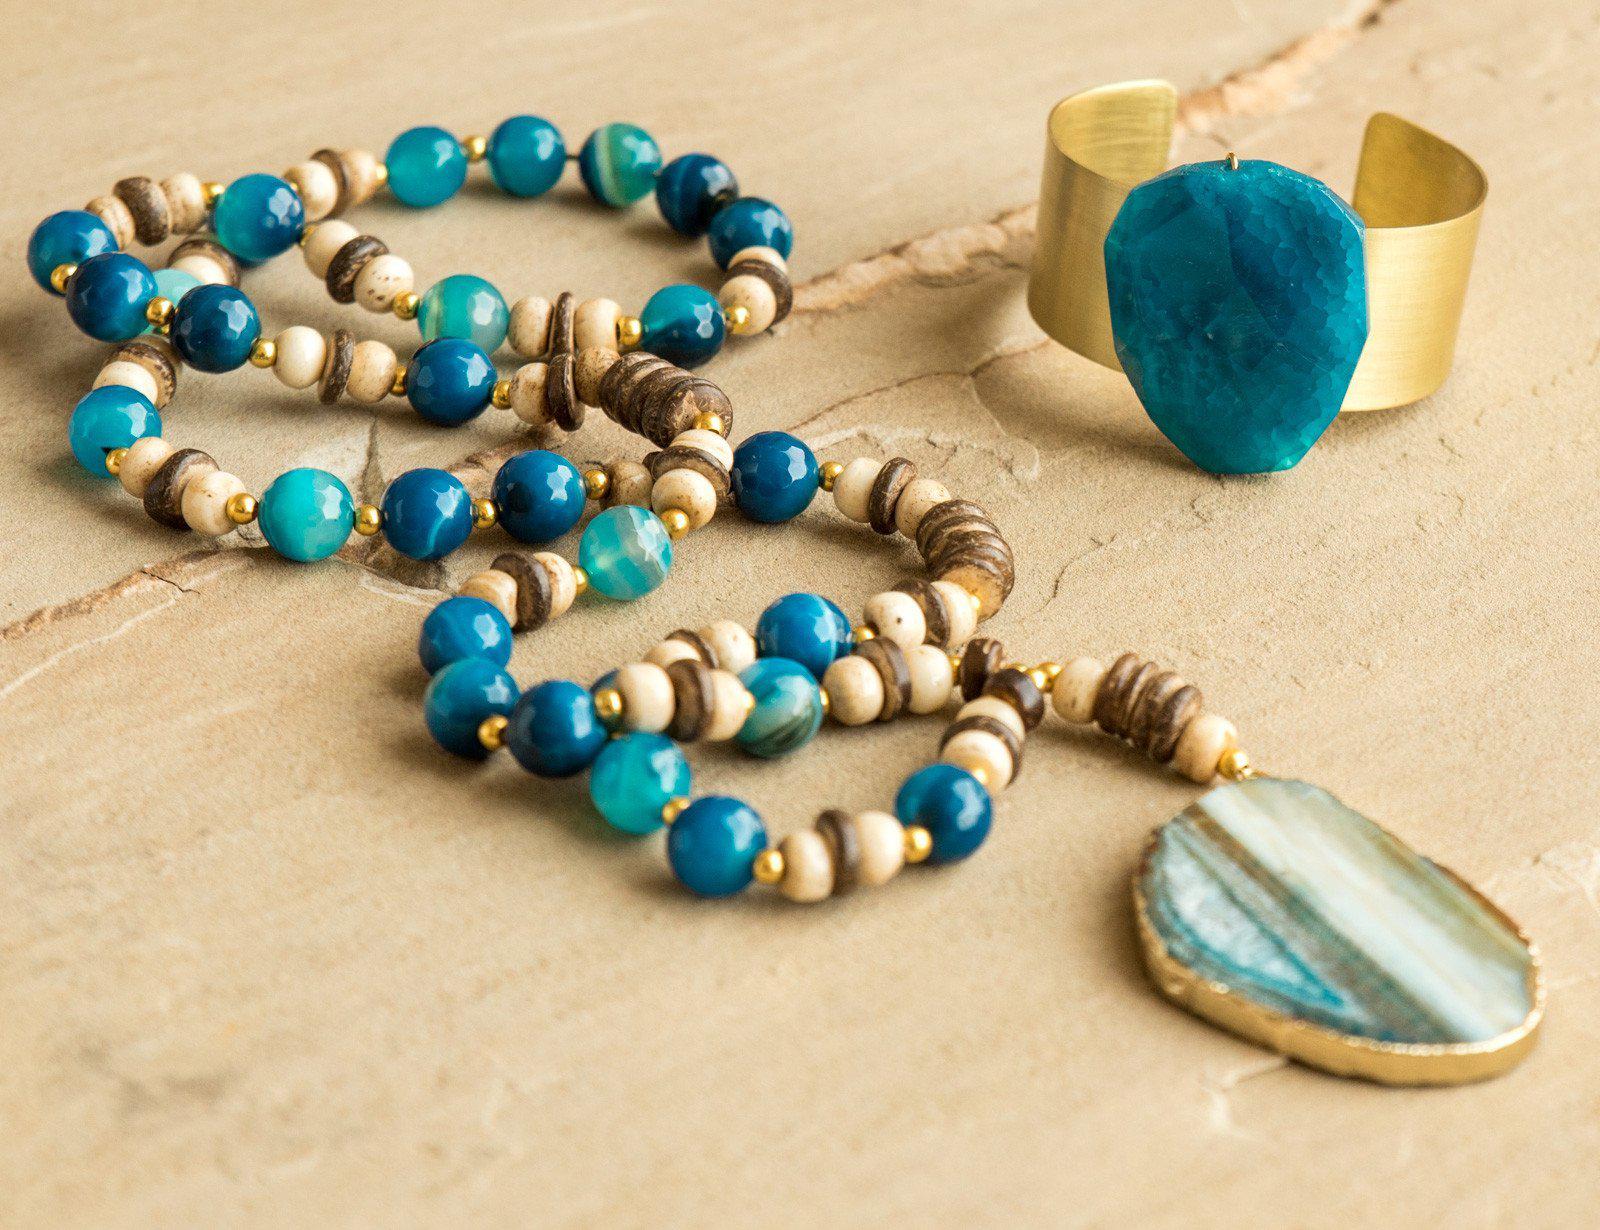 Caribbean Blue Coconut Shell Agate Necklace